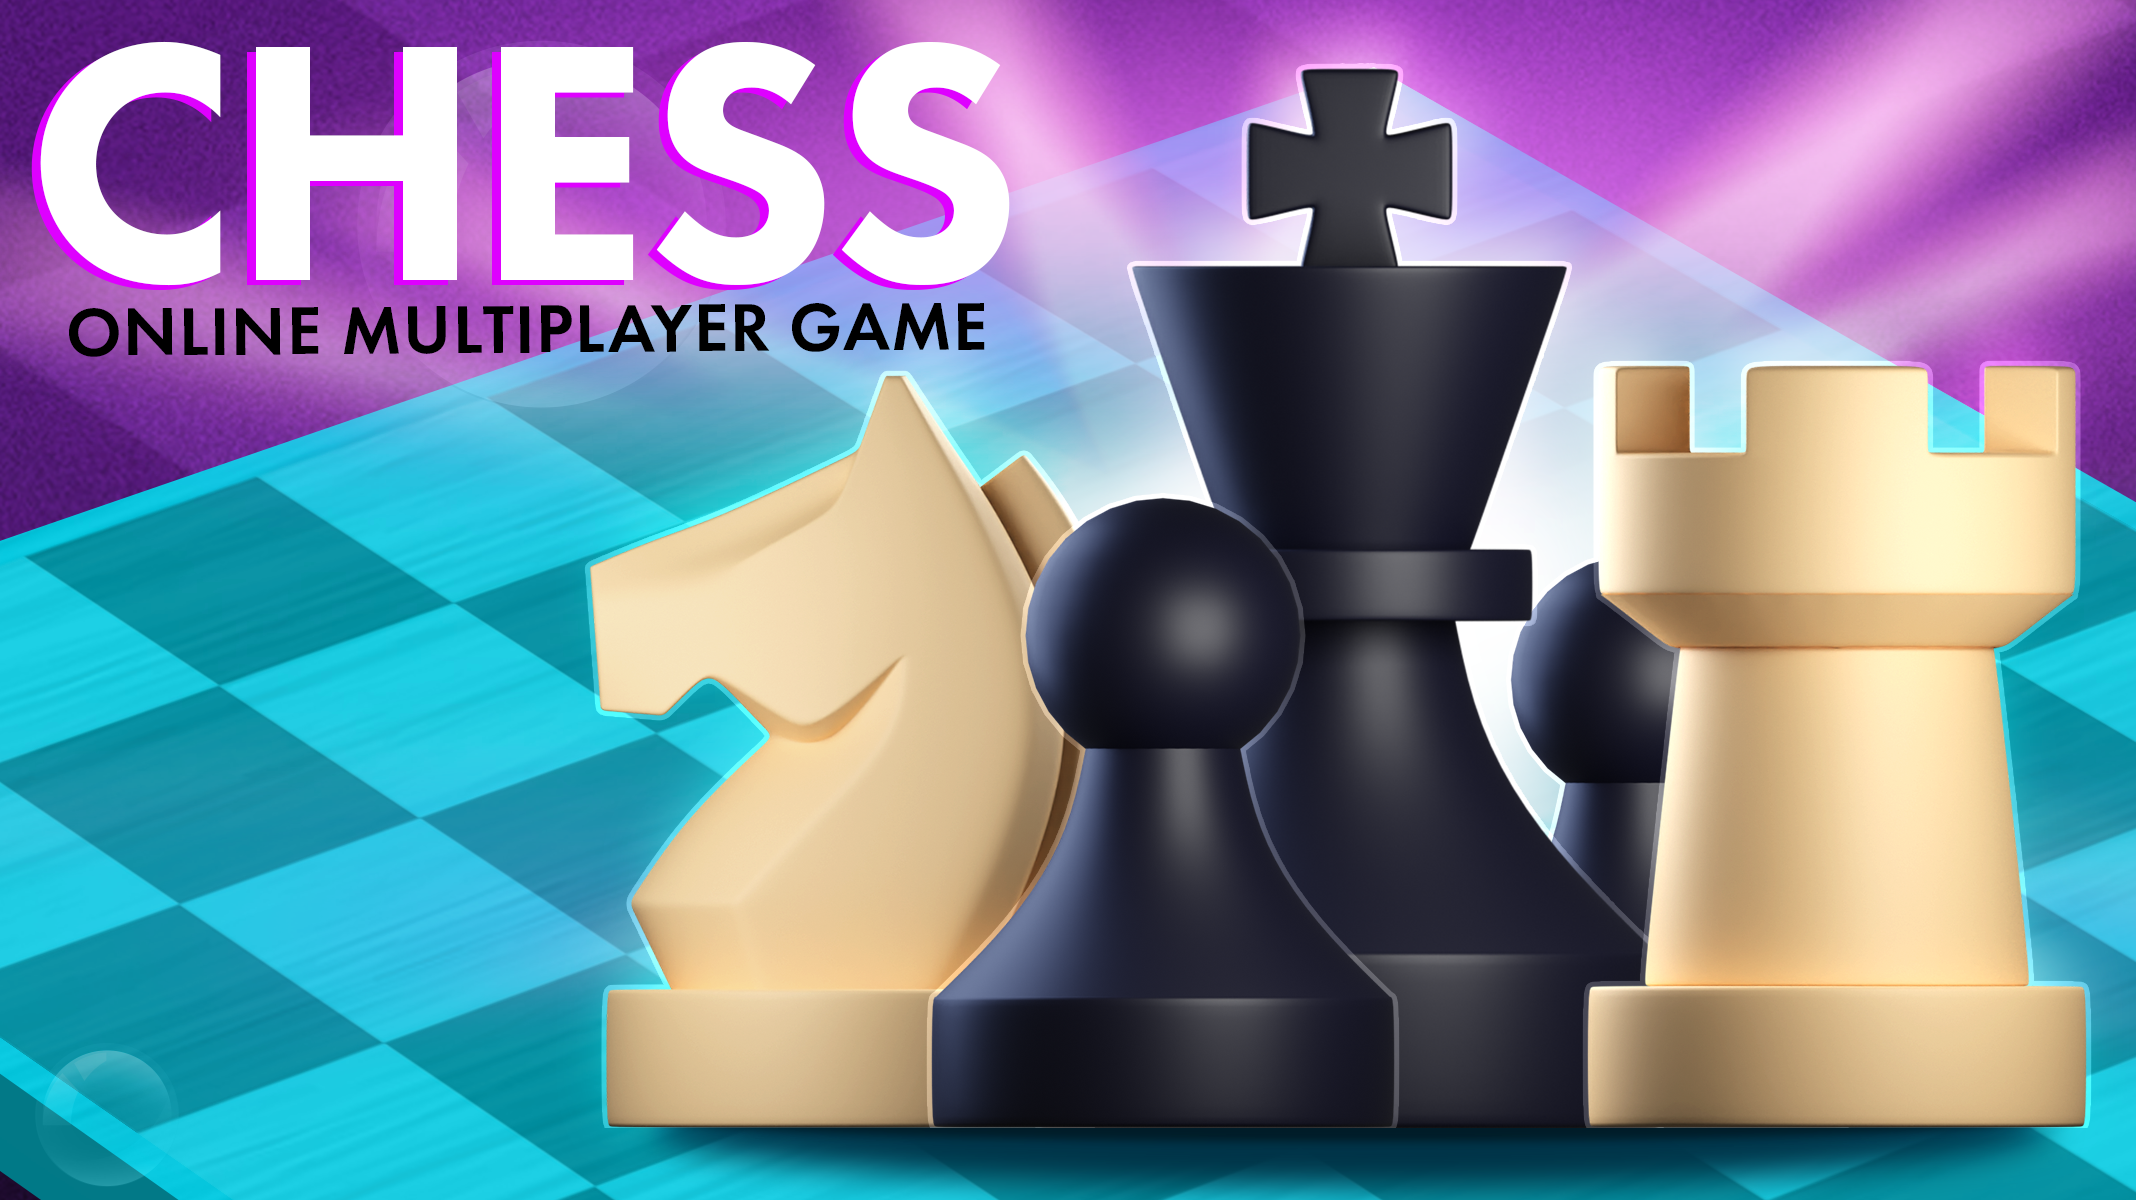 Chess Online Multiplayer Game Image